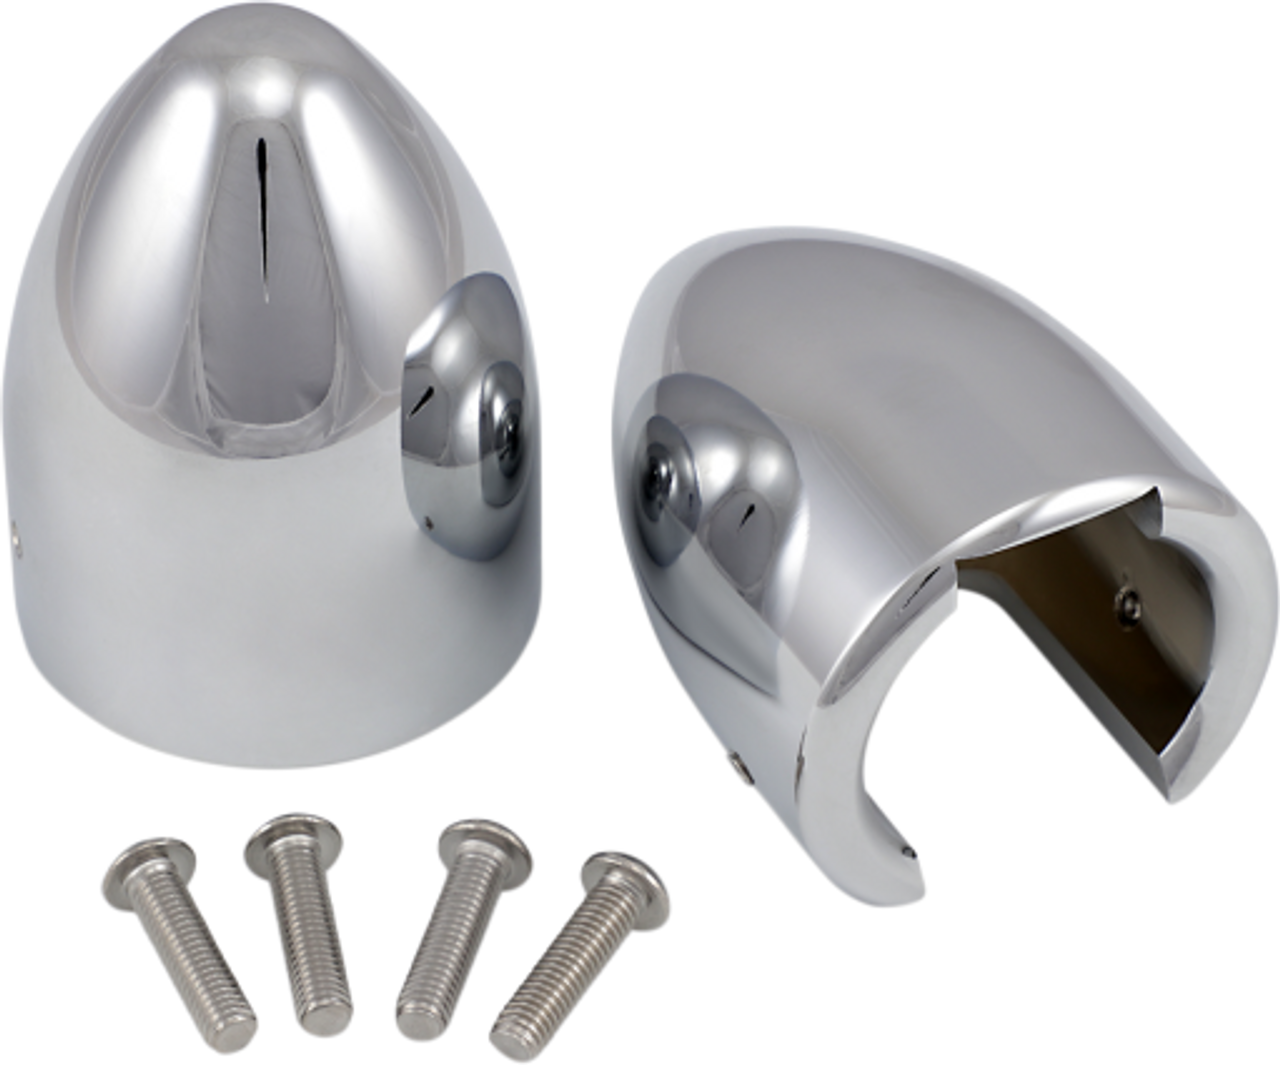 Baron Custom Fork Bullets Axle Nut Covers for Metric Cruisers | Buy Now